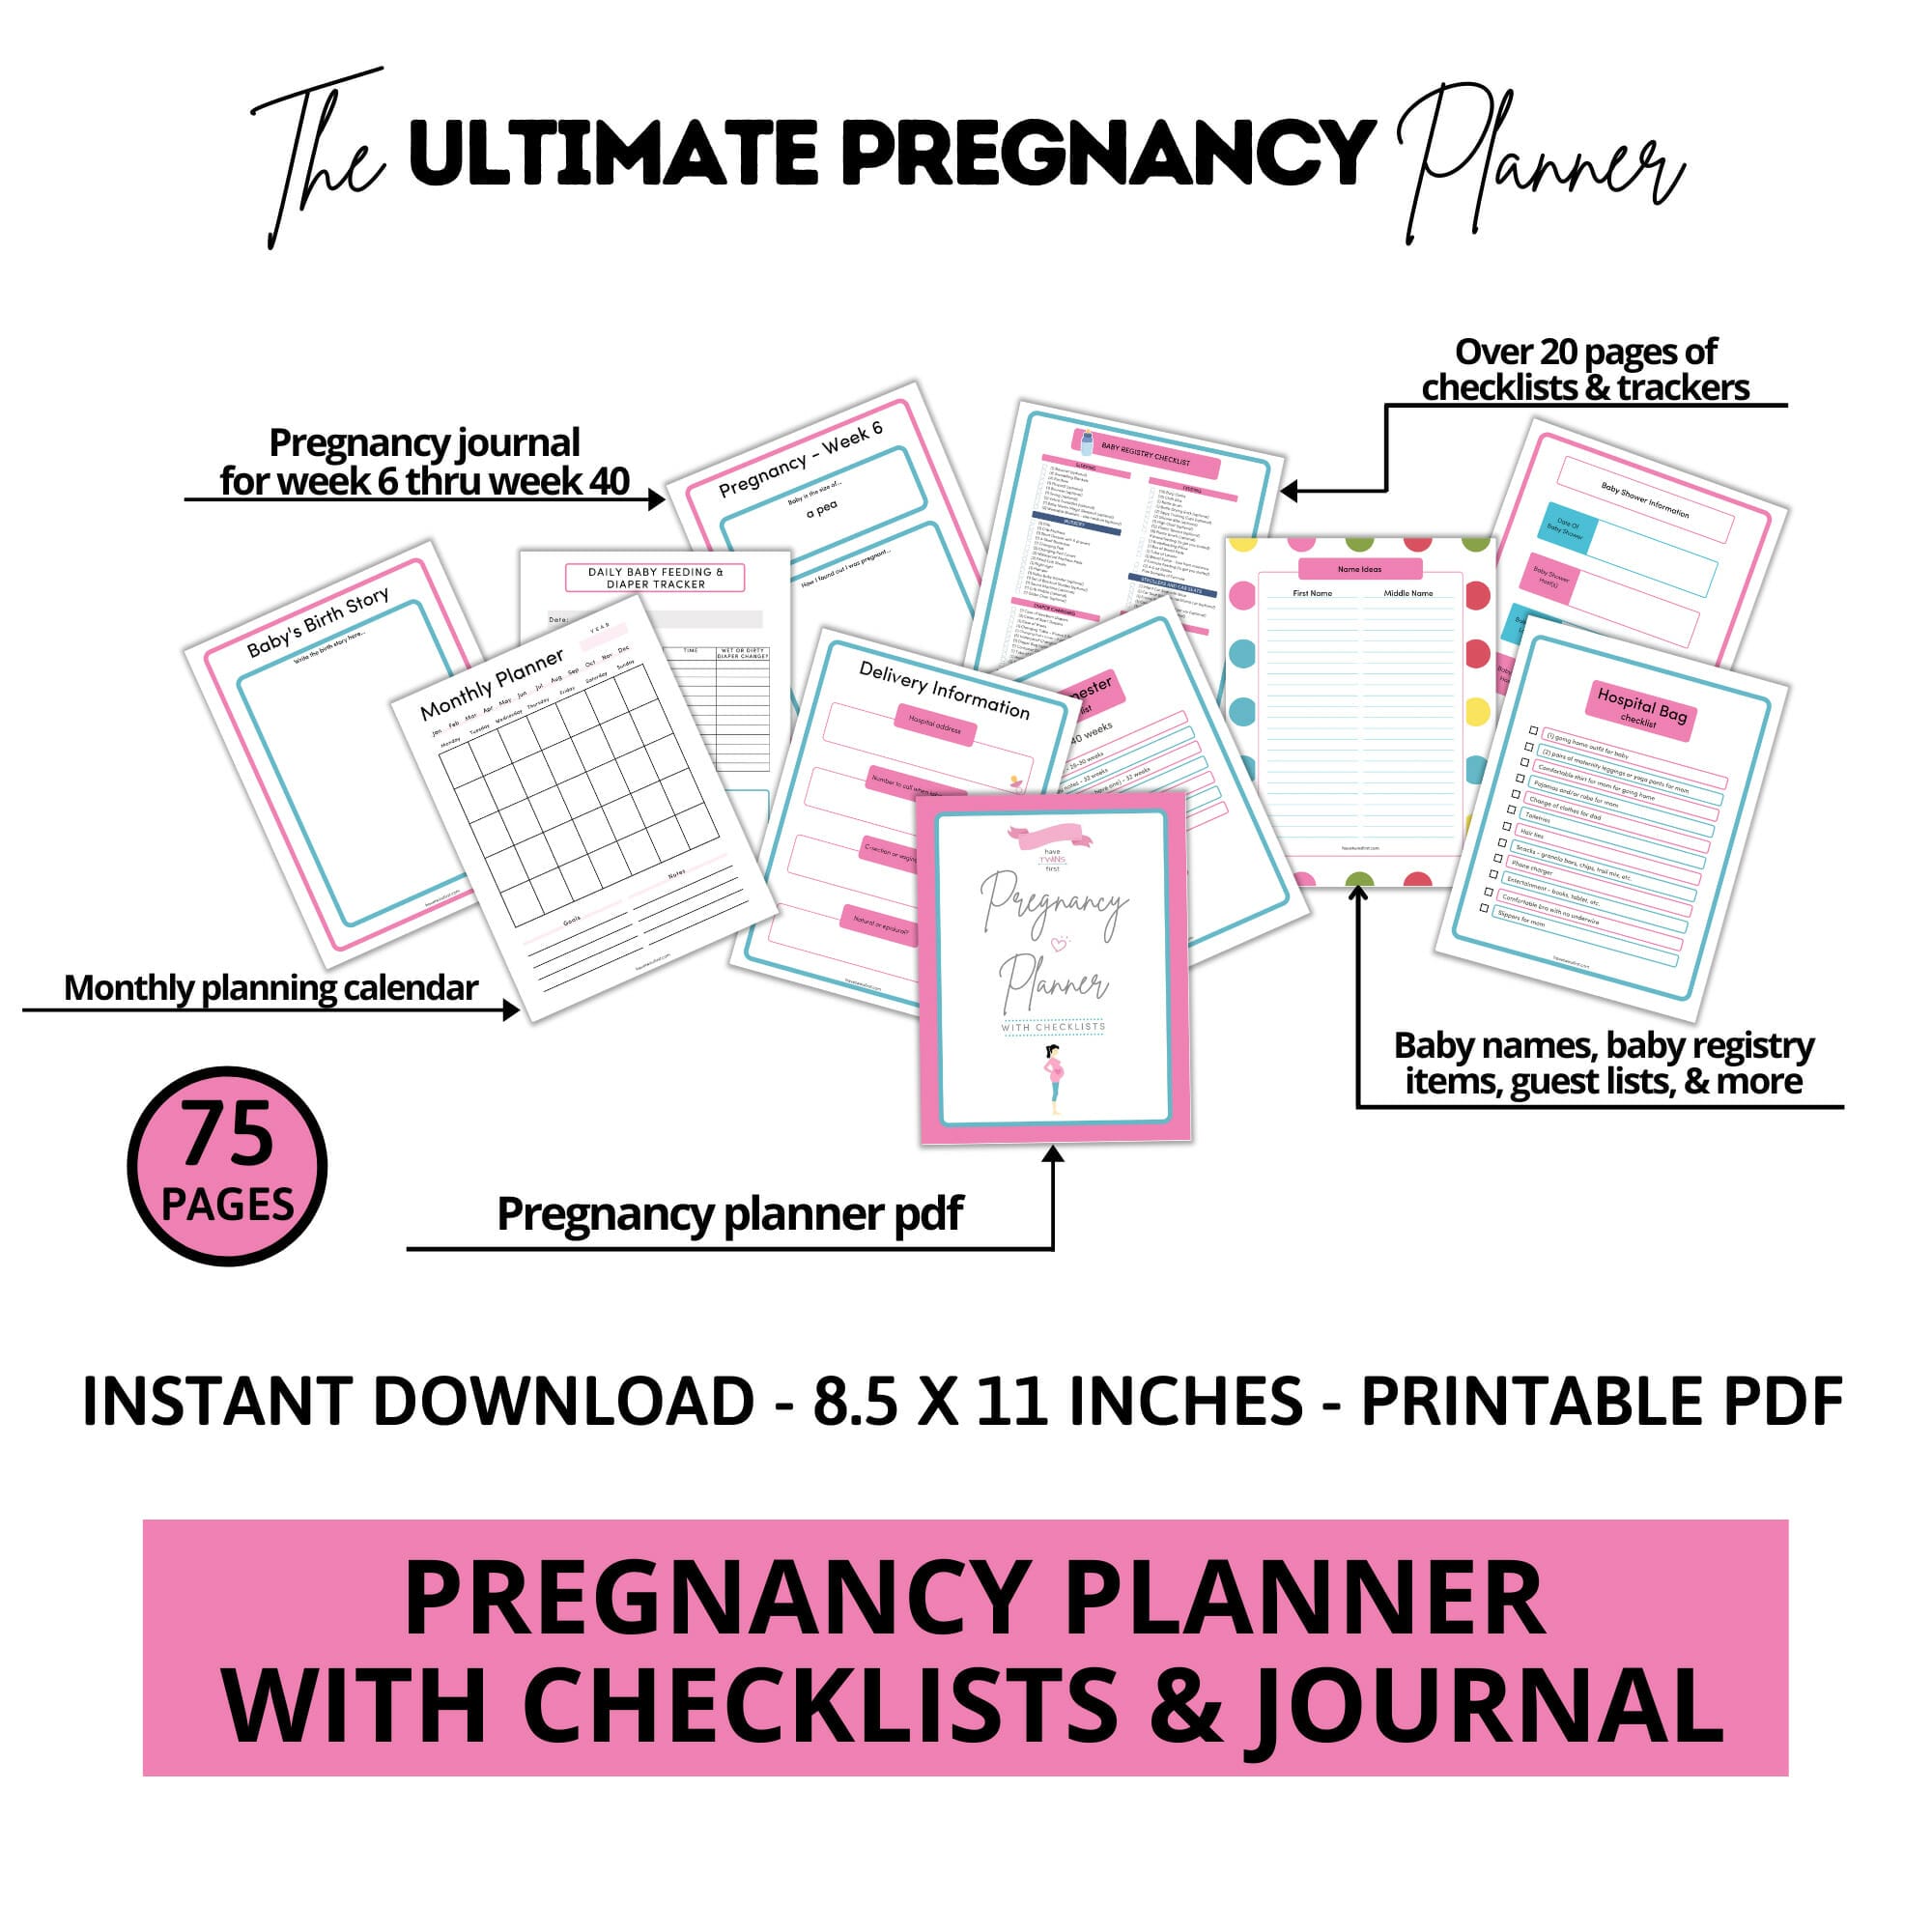 Photo of pregnancy planner with checklists and journal.